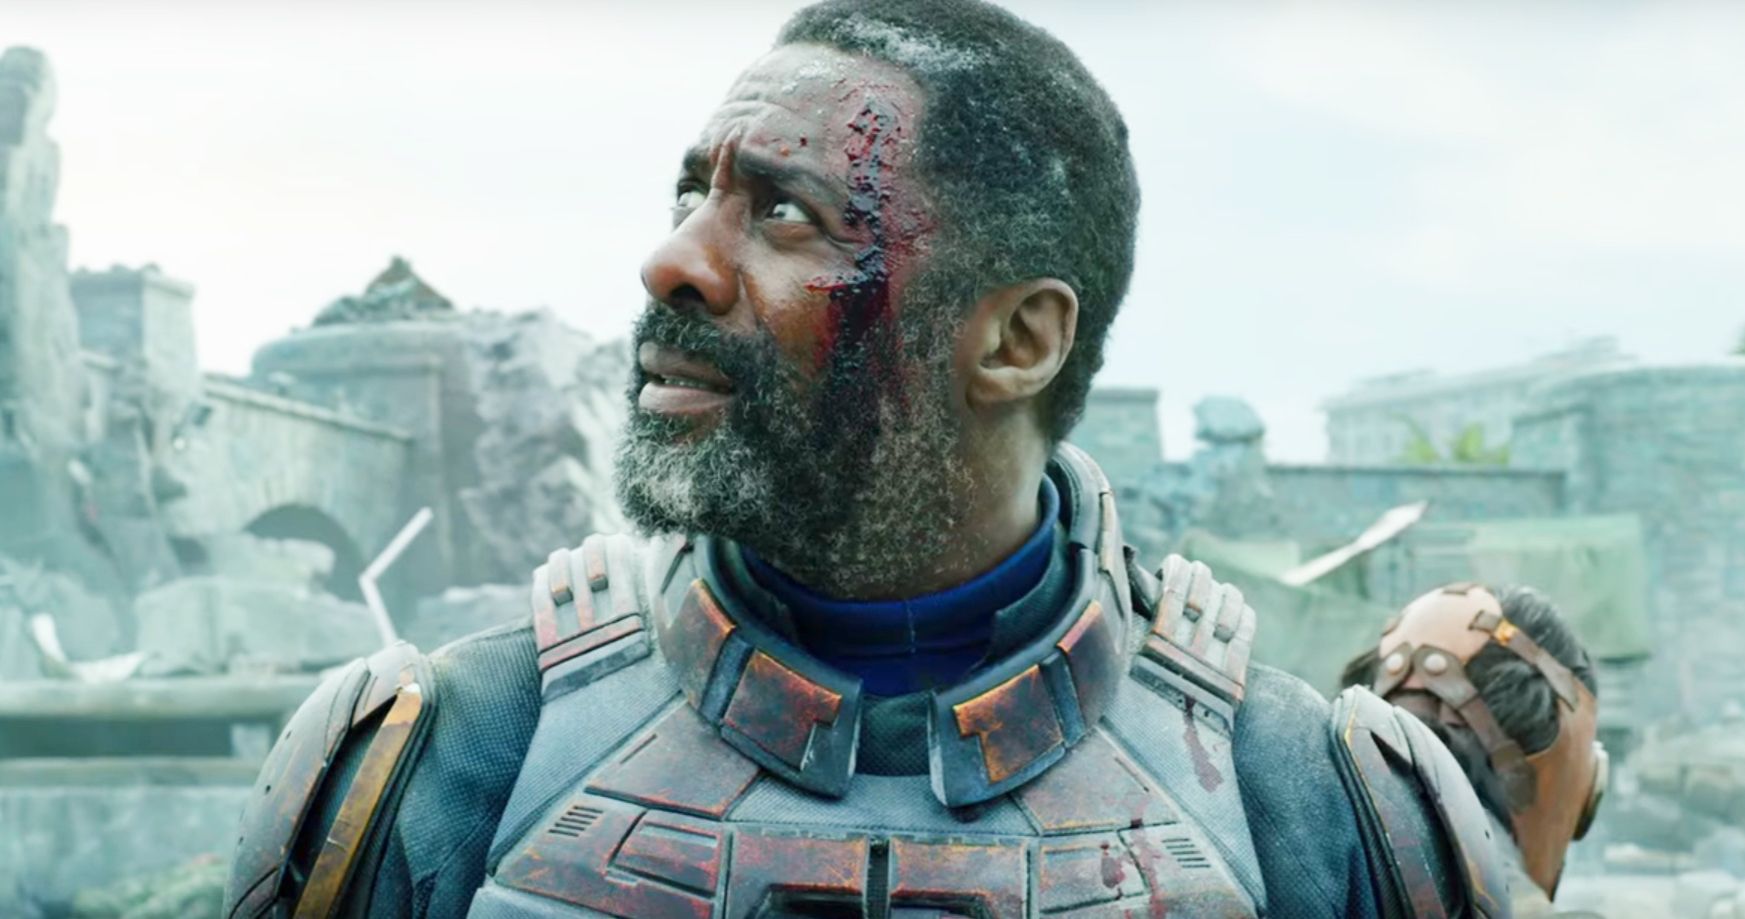 Idris Elba's Bloodsport Exceeded James Gunn's Expectations in The Suicide Squad